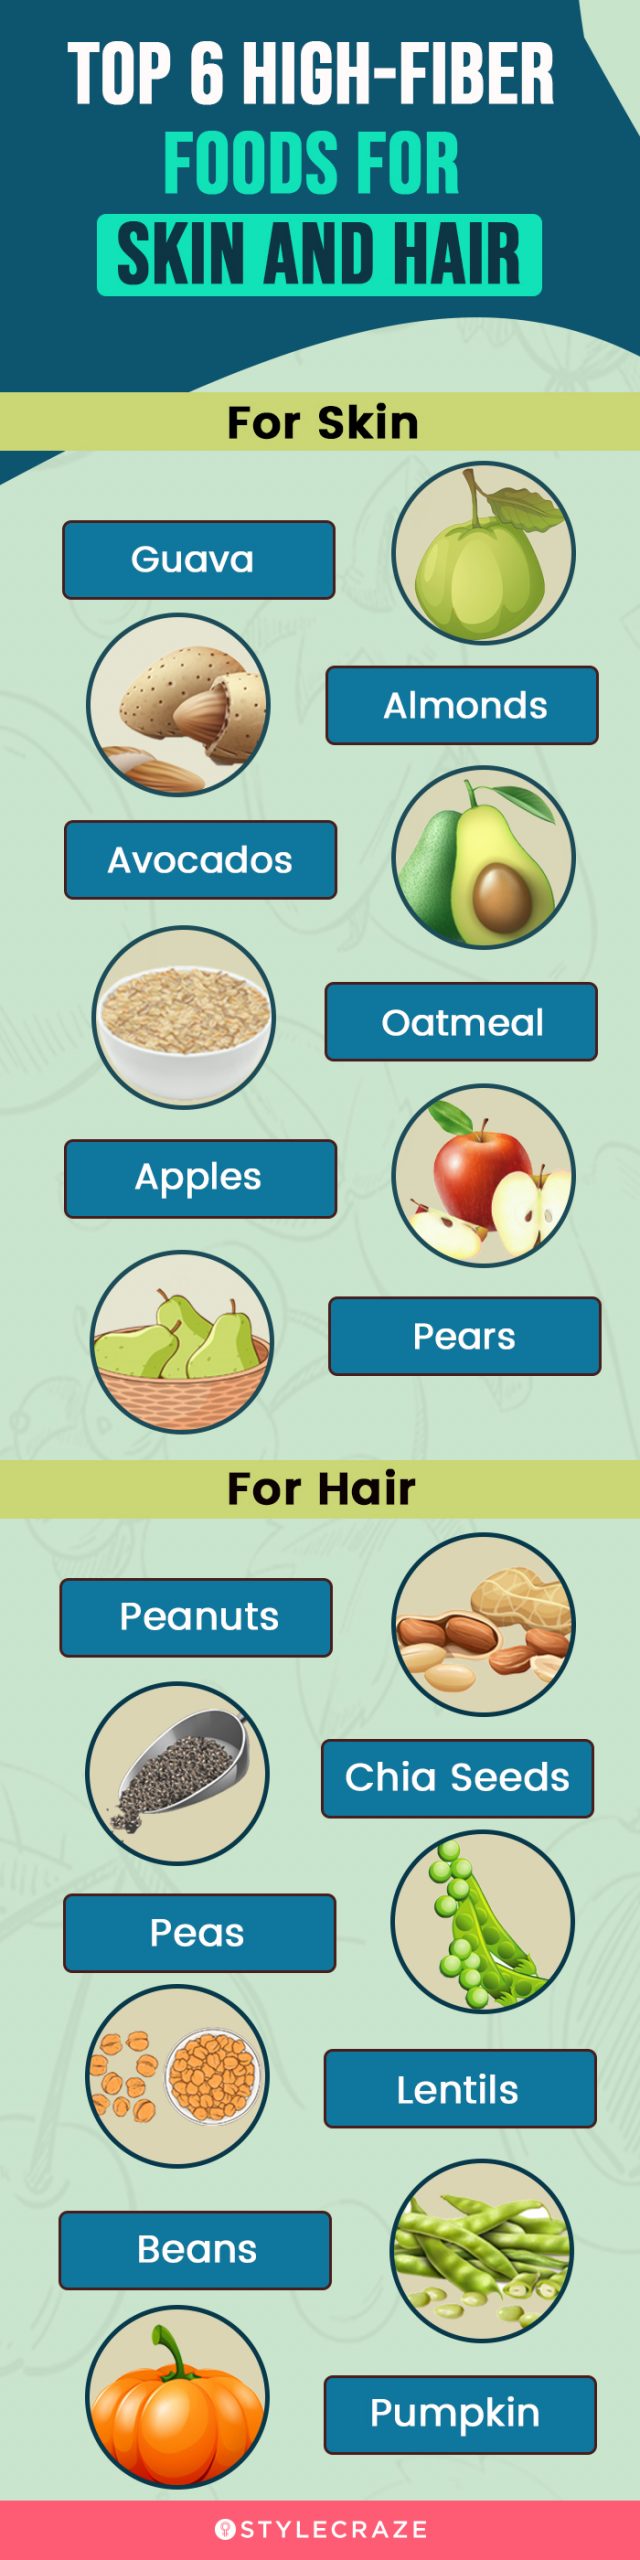 top 6 high fiber foods for skin and hair (infographic)